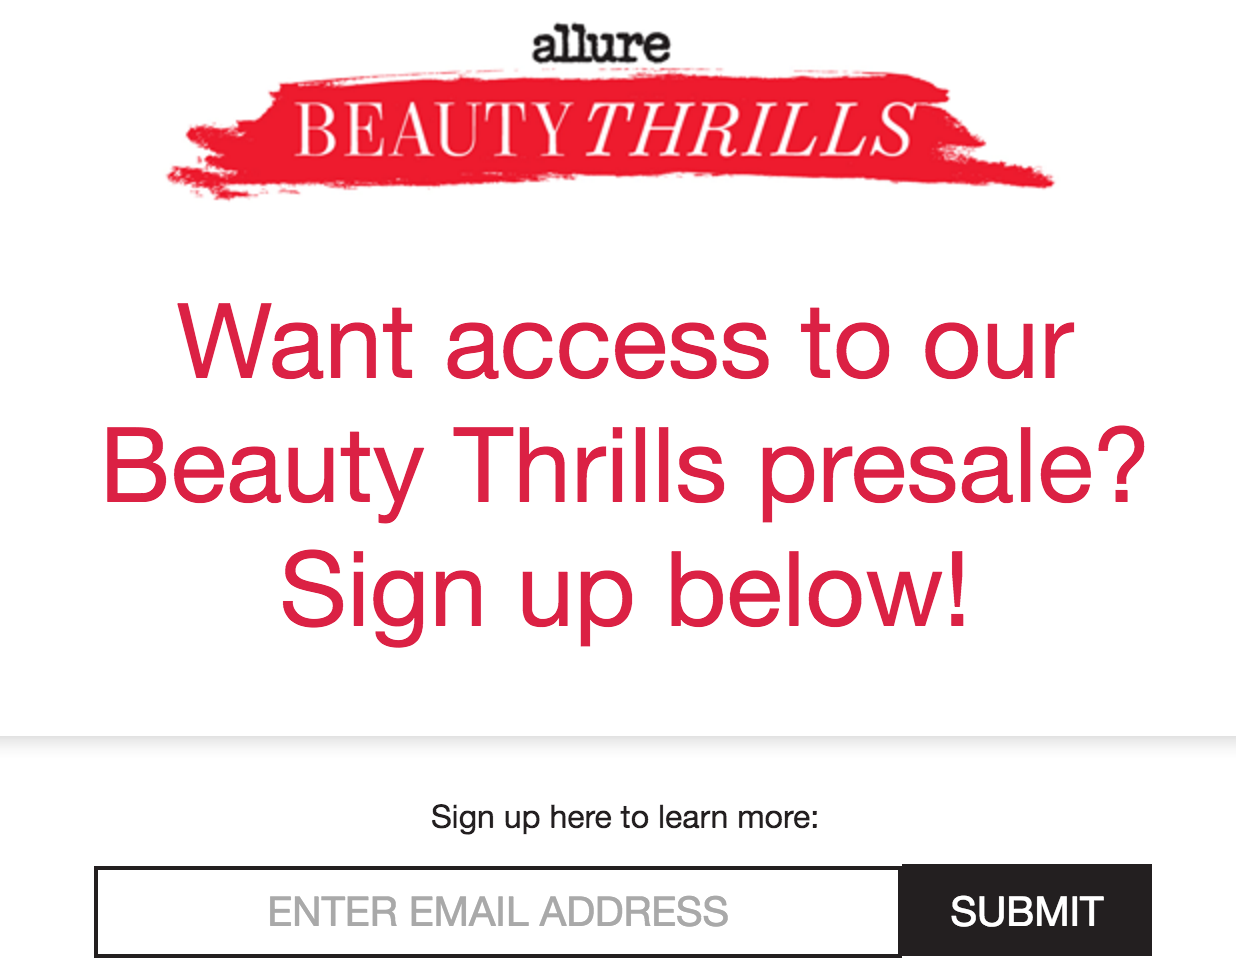 Allure Beauty Thrills Box Pre-Sale Launches on Monday!